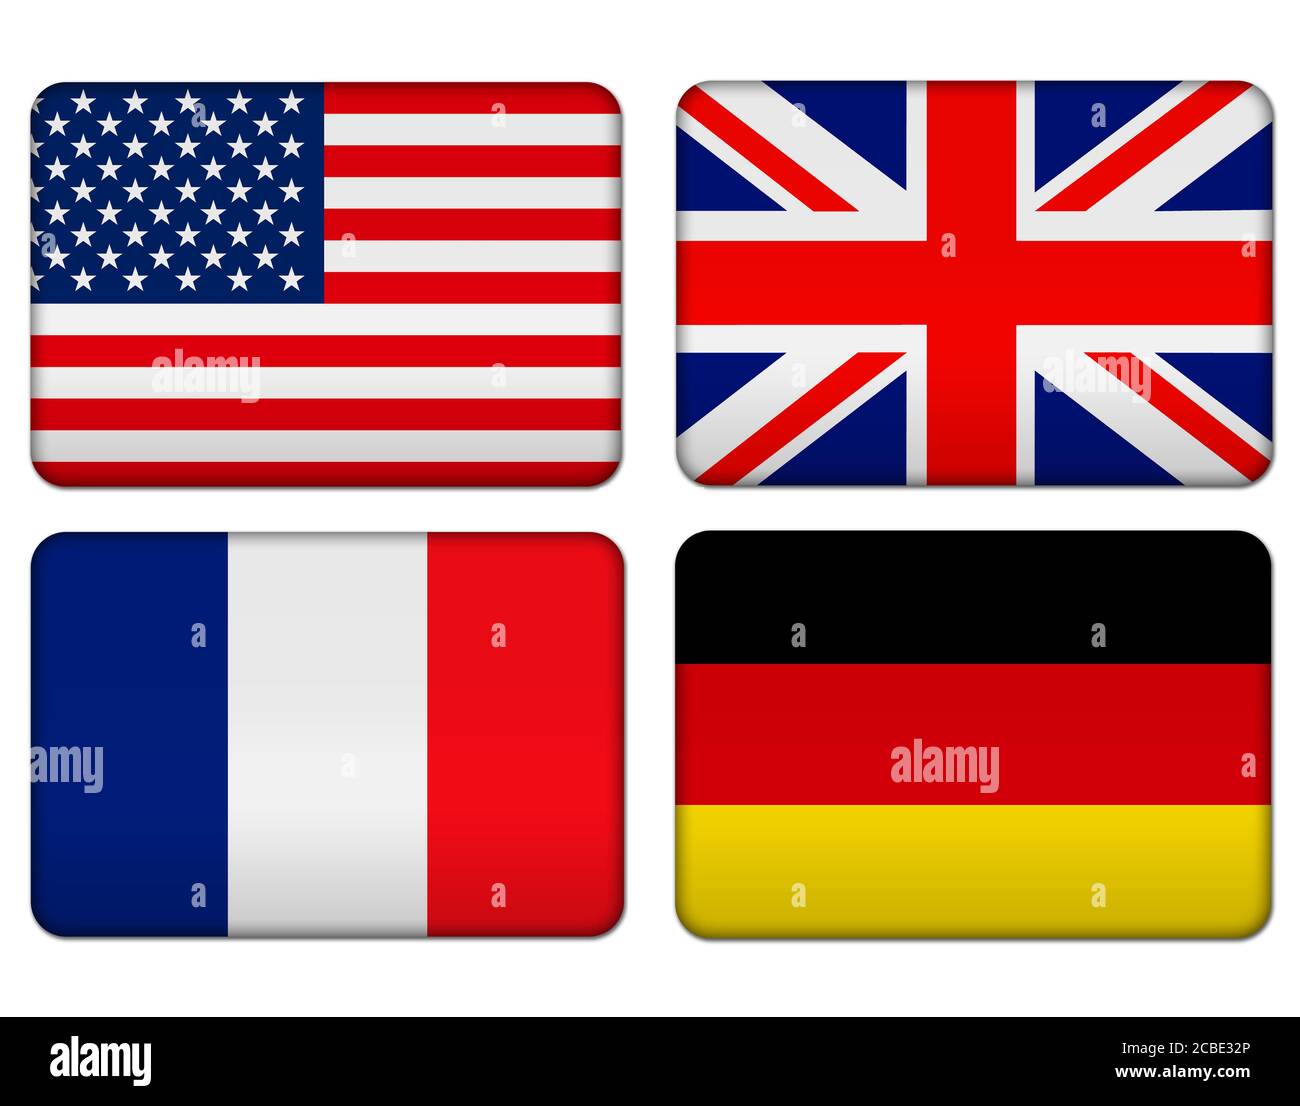 American, United Kingdom, France and Germany flag banner Stock Photo